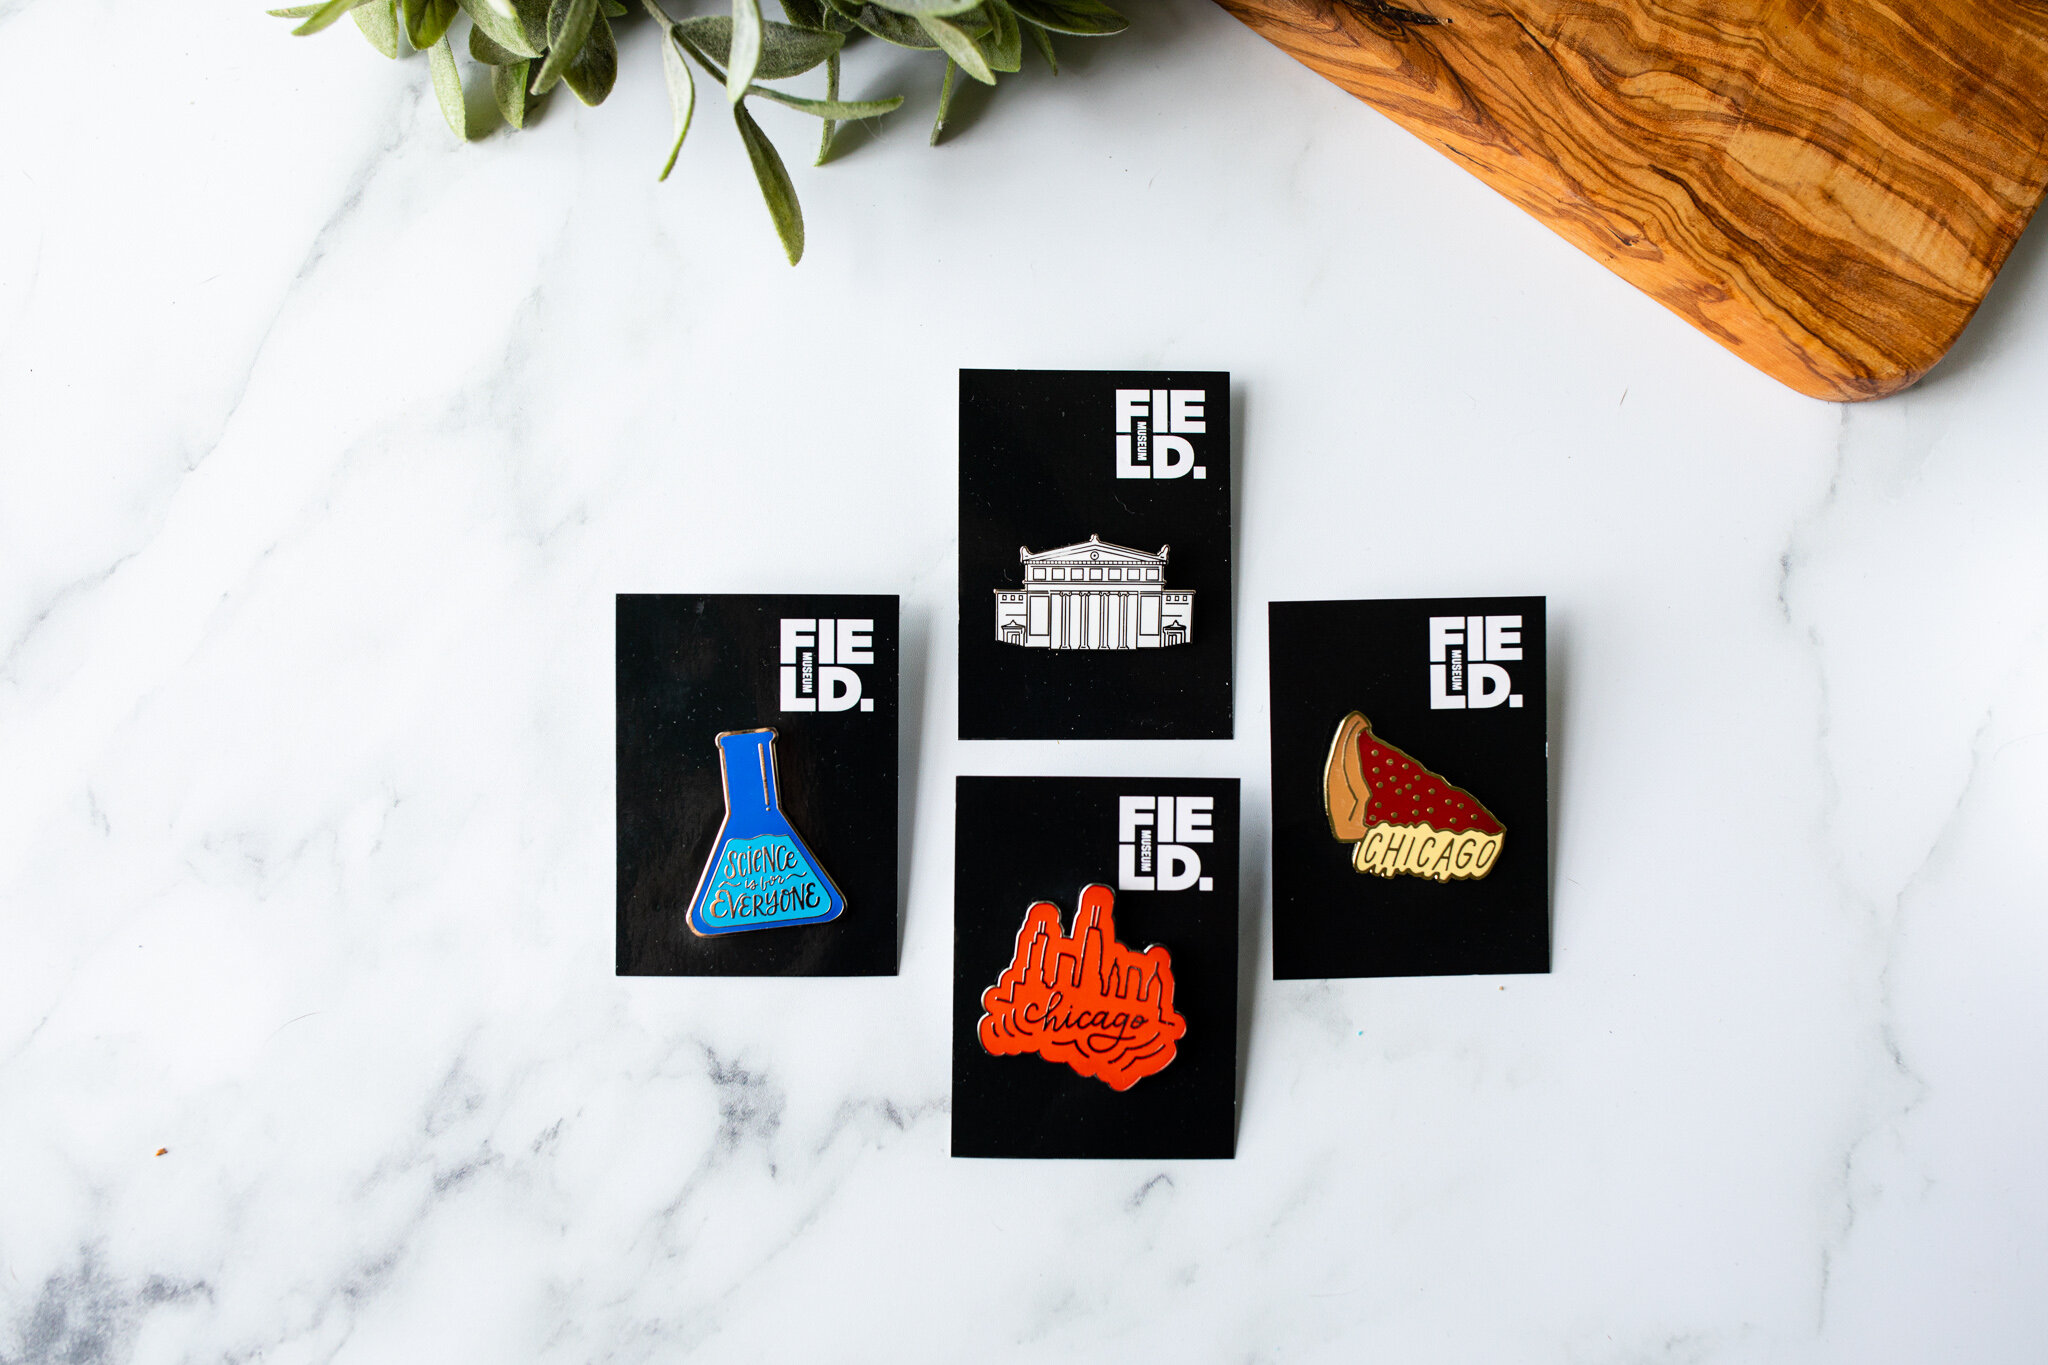 High-quality enamel pins for creatives. Collections include